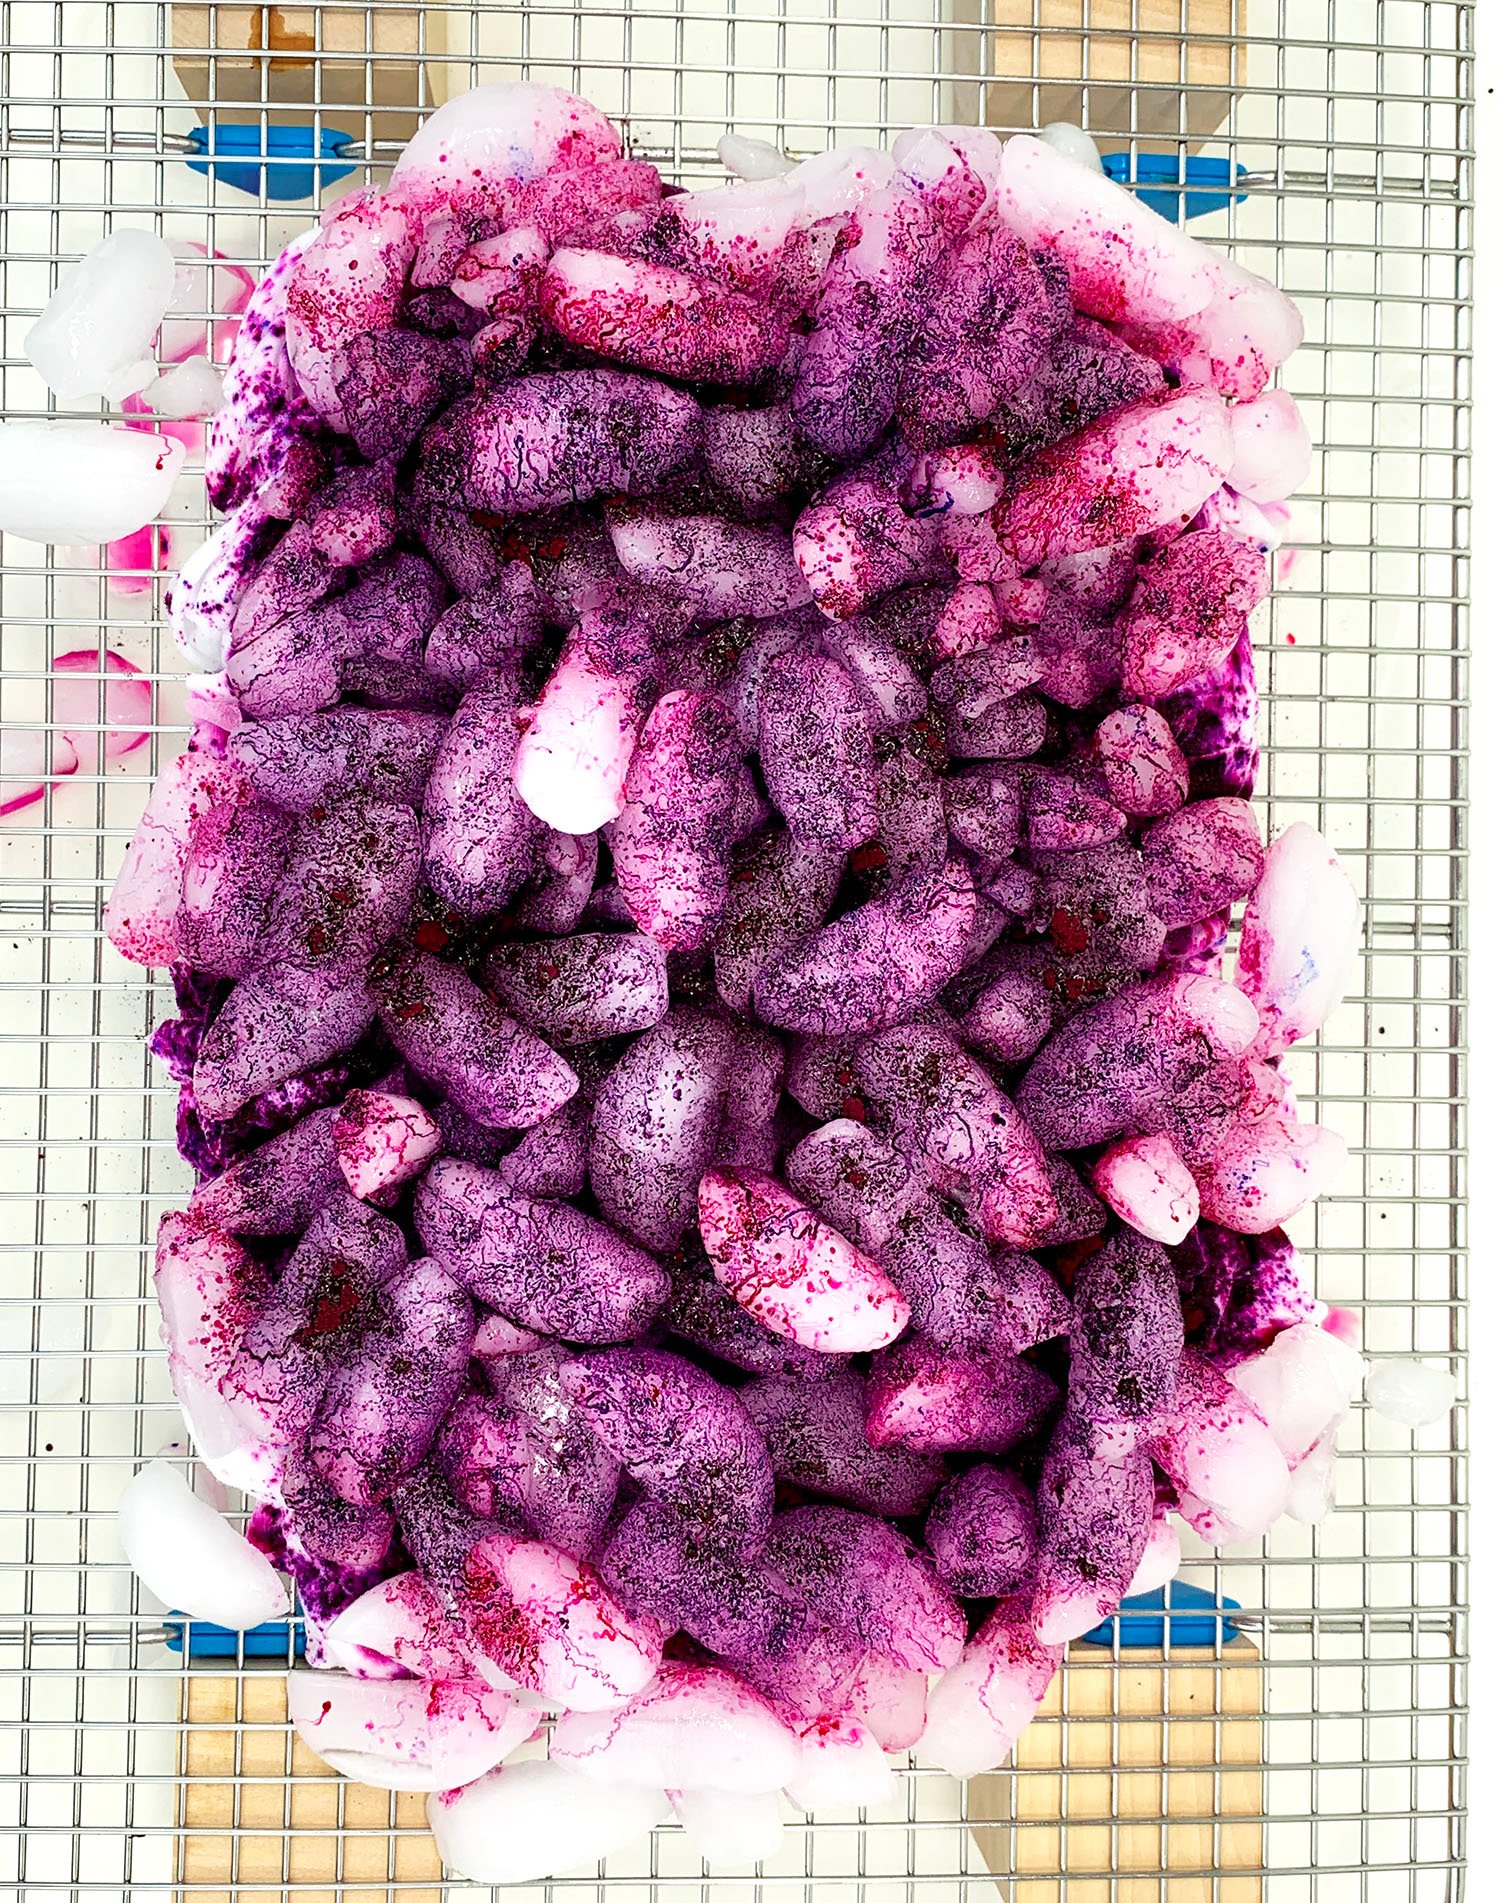 Powdered magenta and purple colored dyes sprinkled over ice for ice dye process